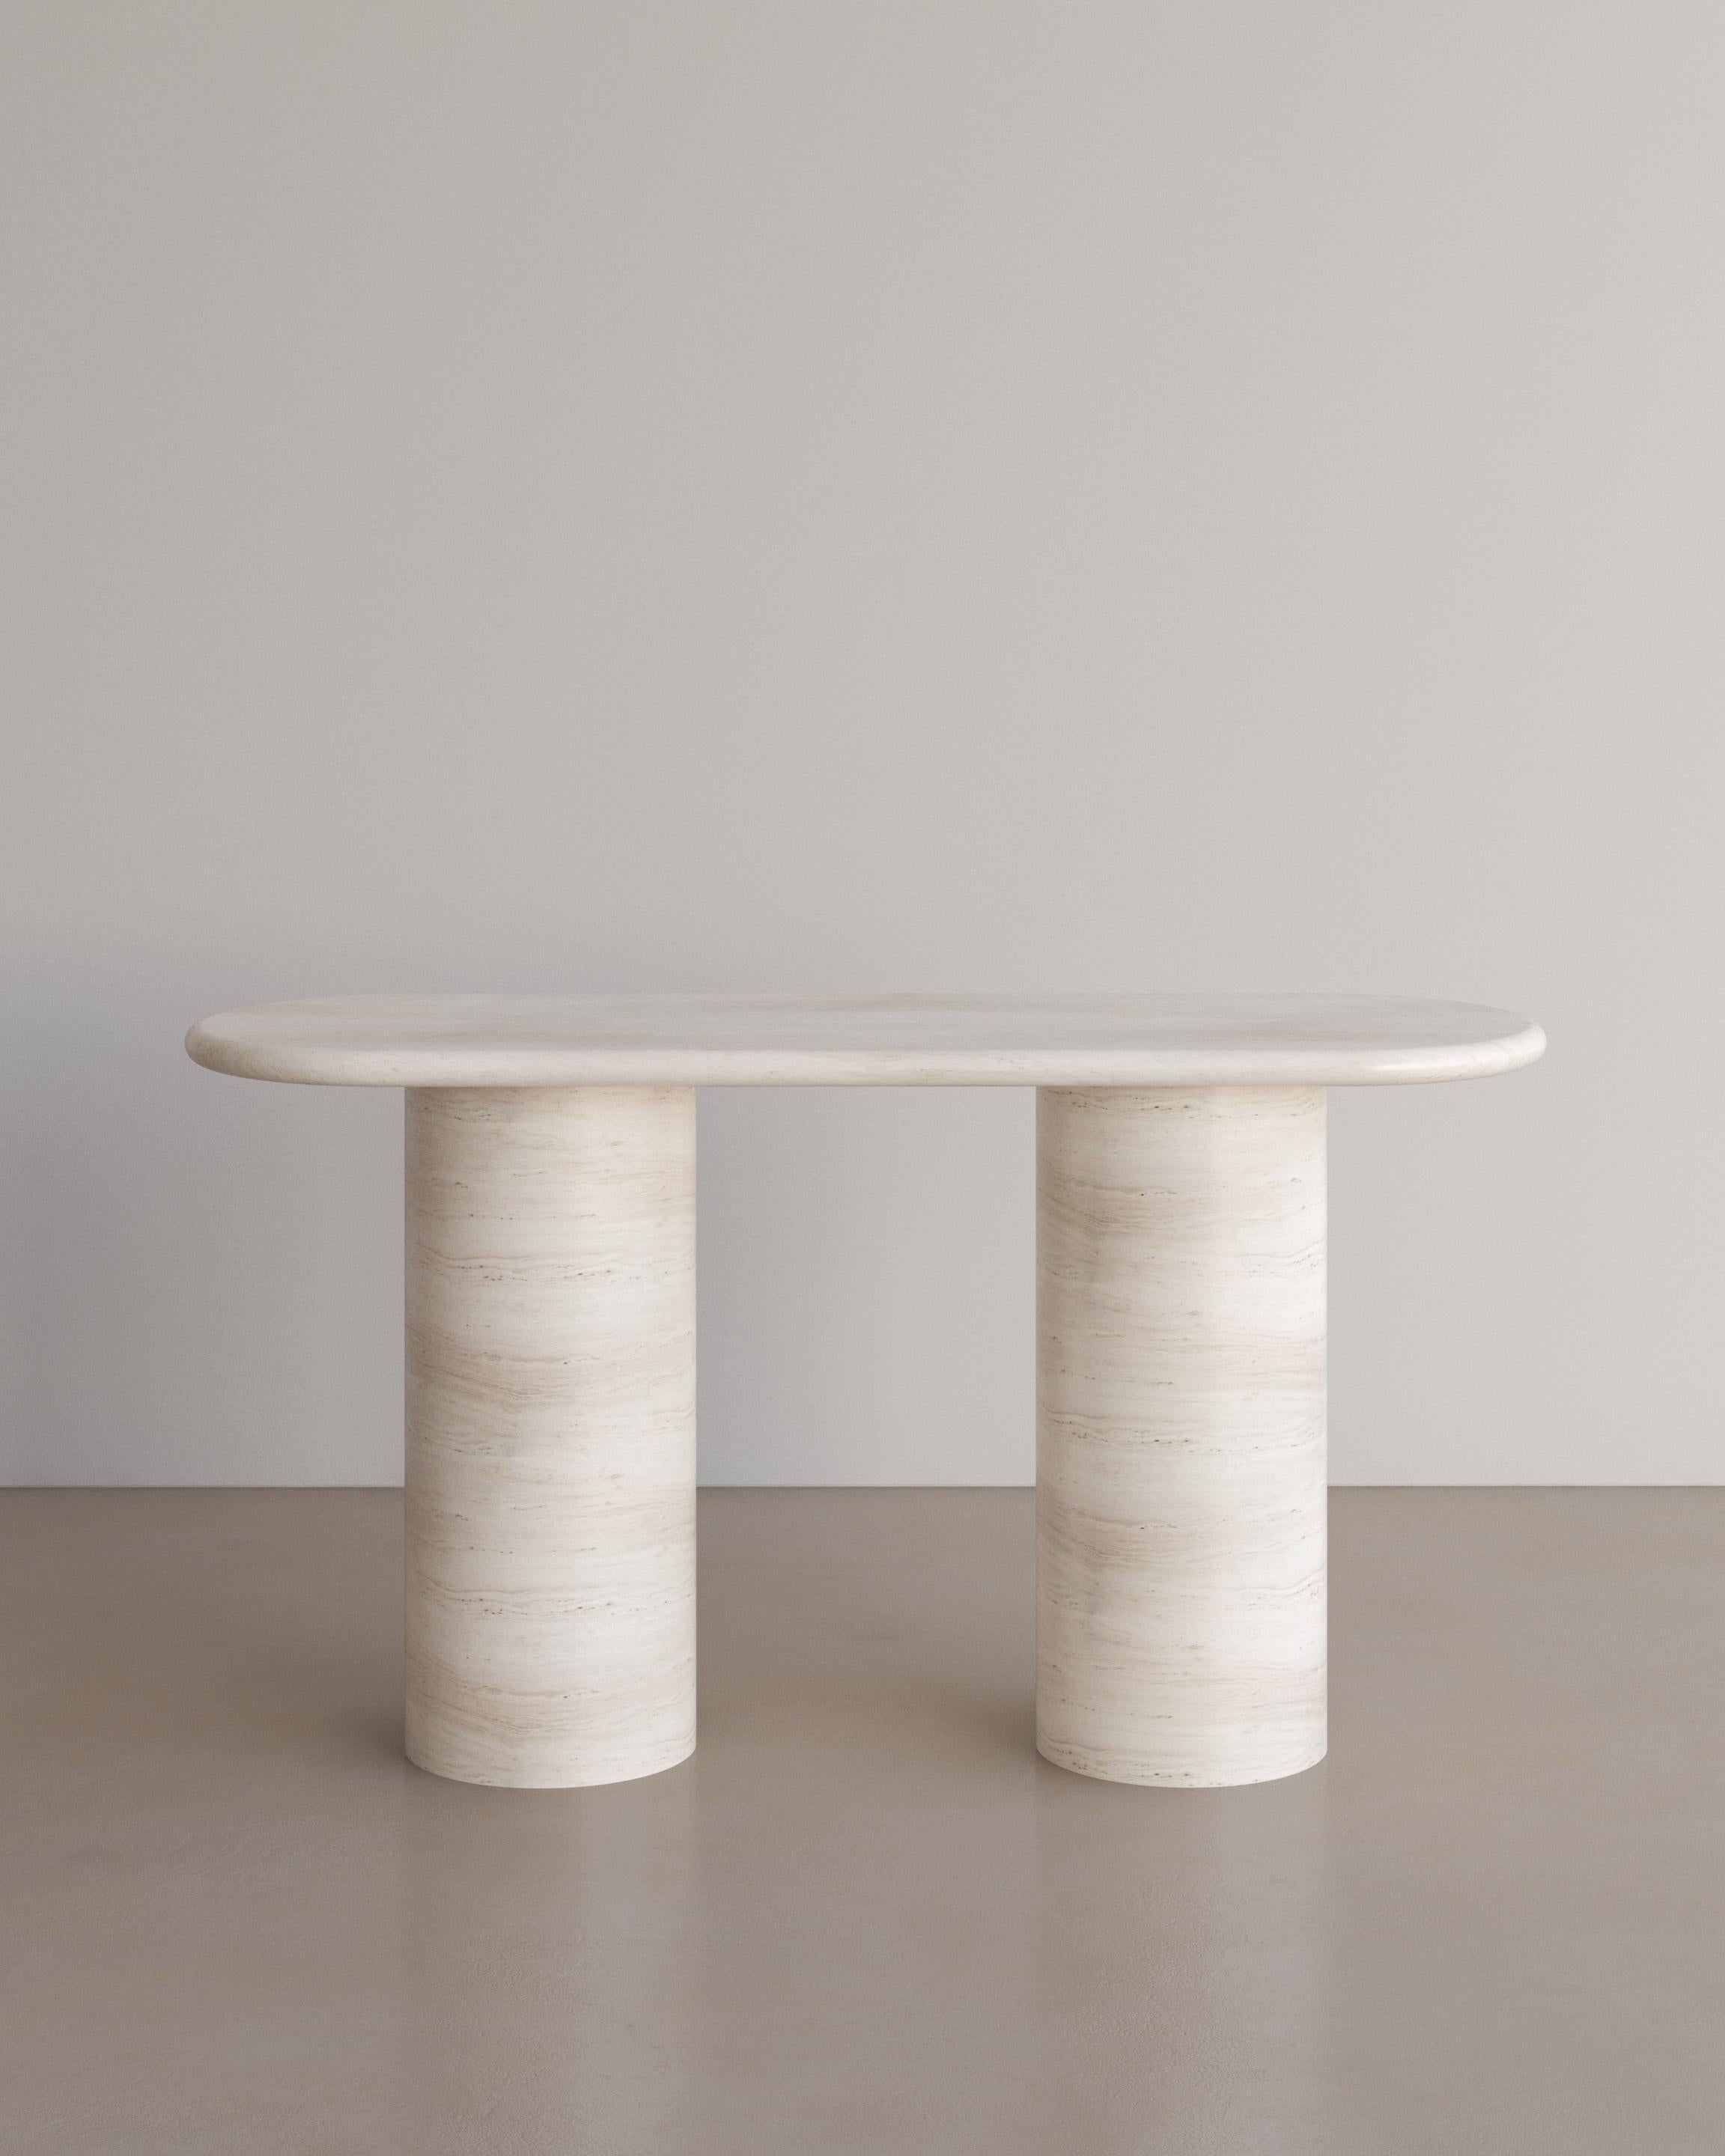 The Voyage Console table in Bianco Travertine by The Essentialist defines life’s simple pleasures in its essential form. Soft planes resting on smooth pillars reflect nature’s aesthetic balance and perfect harmony.

Igniting a dance between